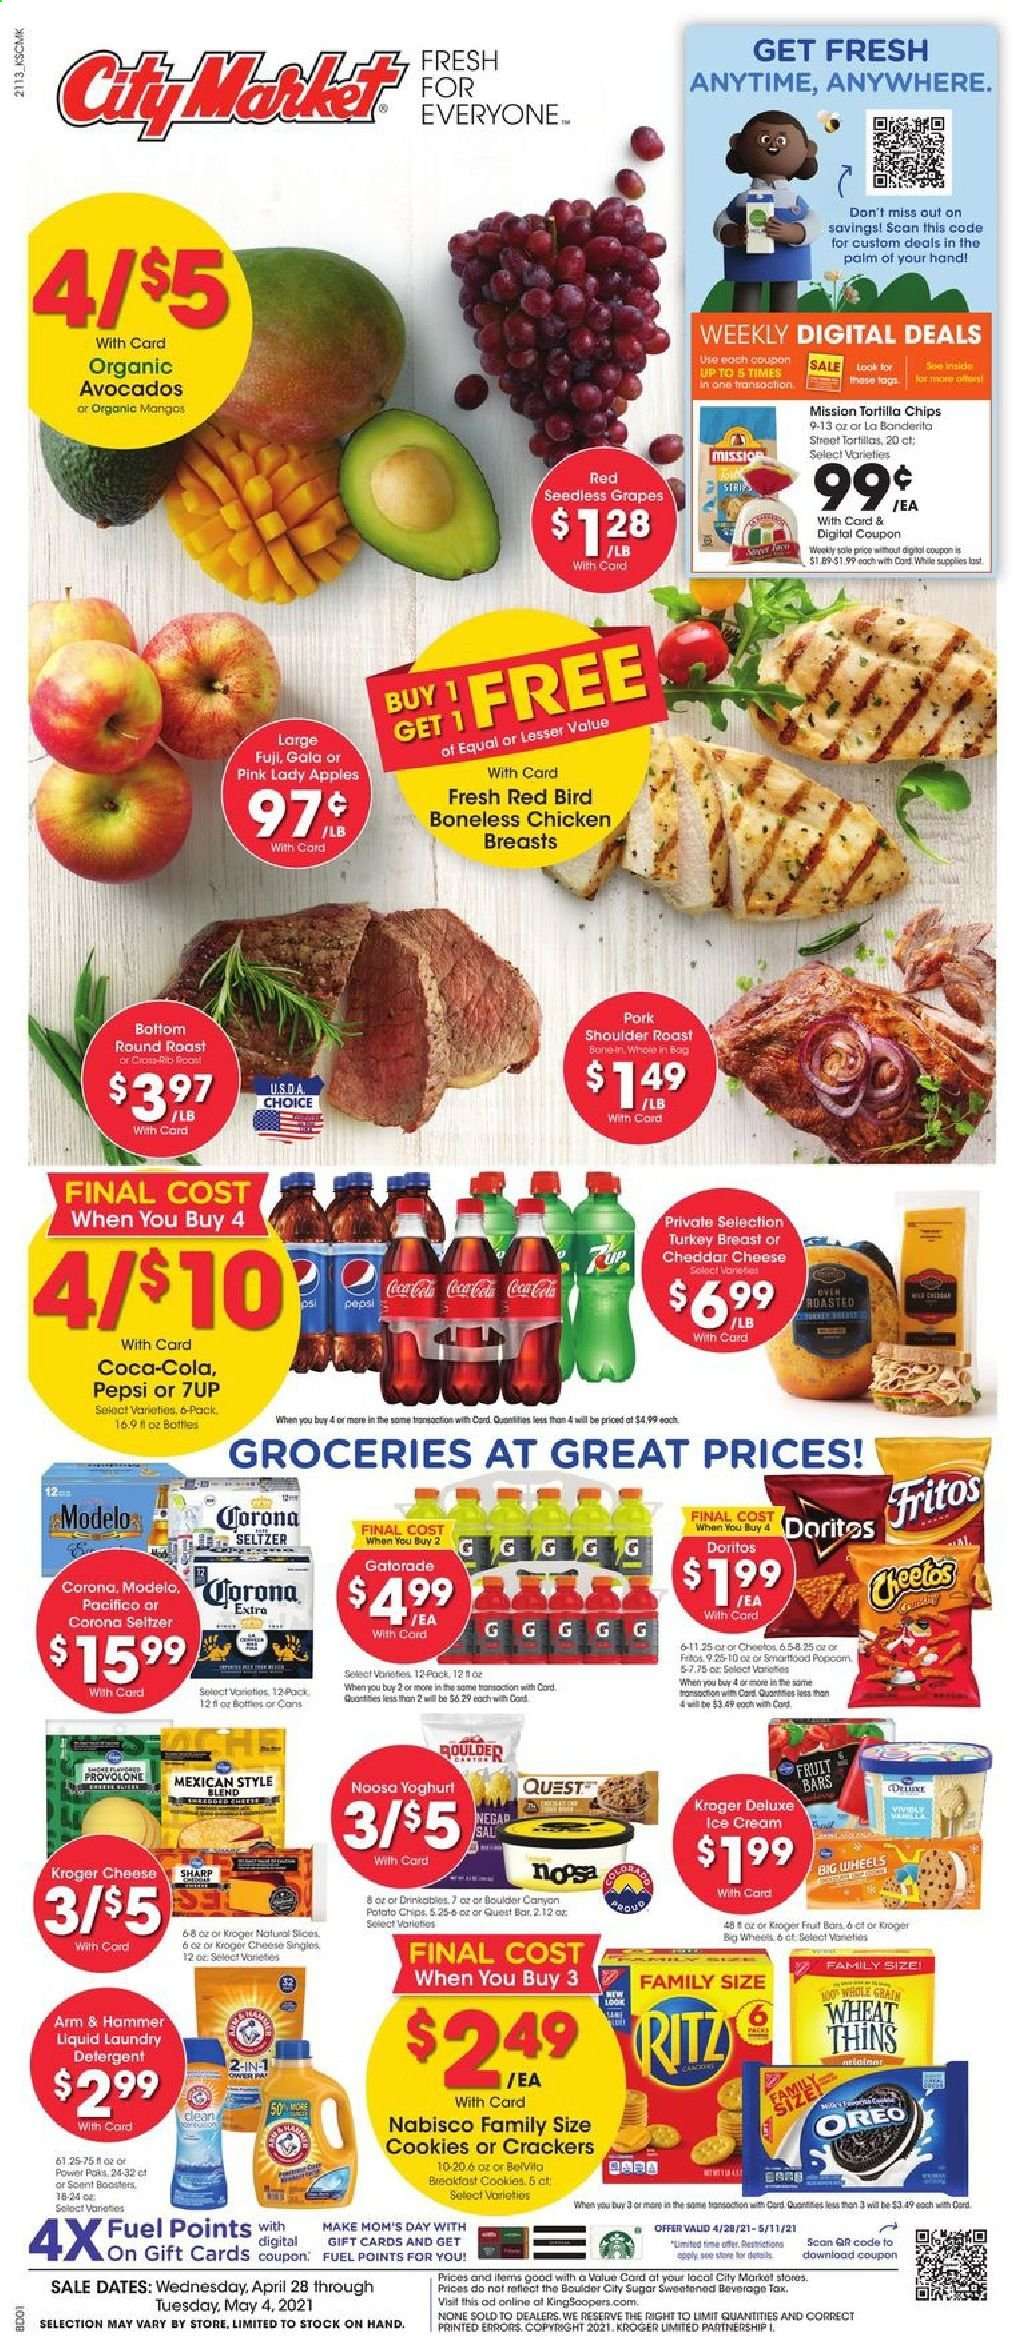 thumbnail - City Market Flyer - 04/28/2021 - 05/04/2021 - Sales products - seedless grapes, apples, avocado, Gala, grapes, mango, Pink Lady, cheese, Oreo, yoghurt, ice cream, cookies, crackers, RITZ, Doritos, Fritos, tortilla chips, potato chips, Cheetos, chips, Smartfood, Thins, ARM & HAMMER, sugar, Coca-Cola, Pepsi, 7UP, Gatorade, beer, Corona Extra, Modelo, chicken breasts, beef meat, round roast, detergent, laundry detergent. Page 1.